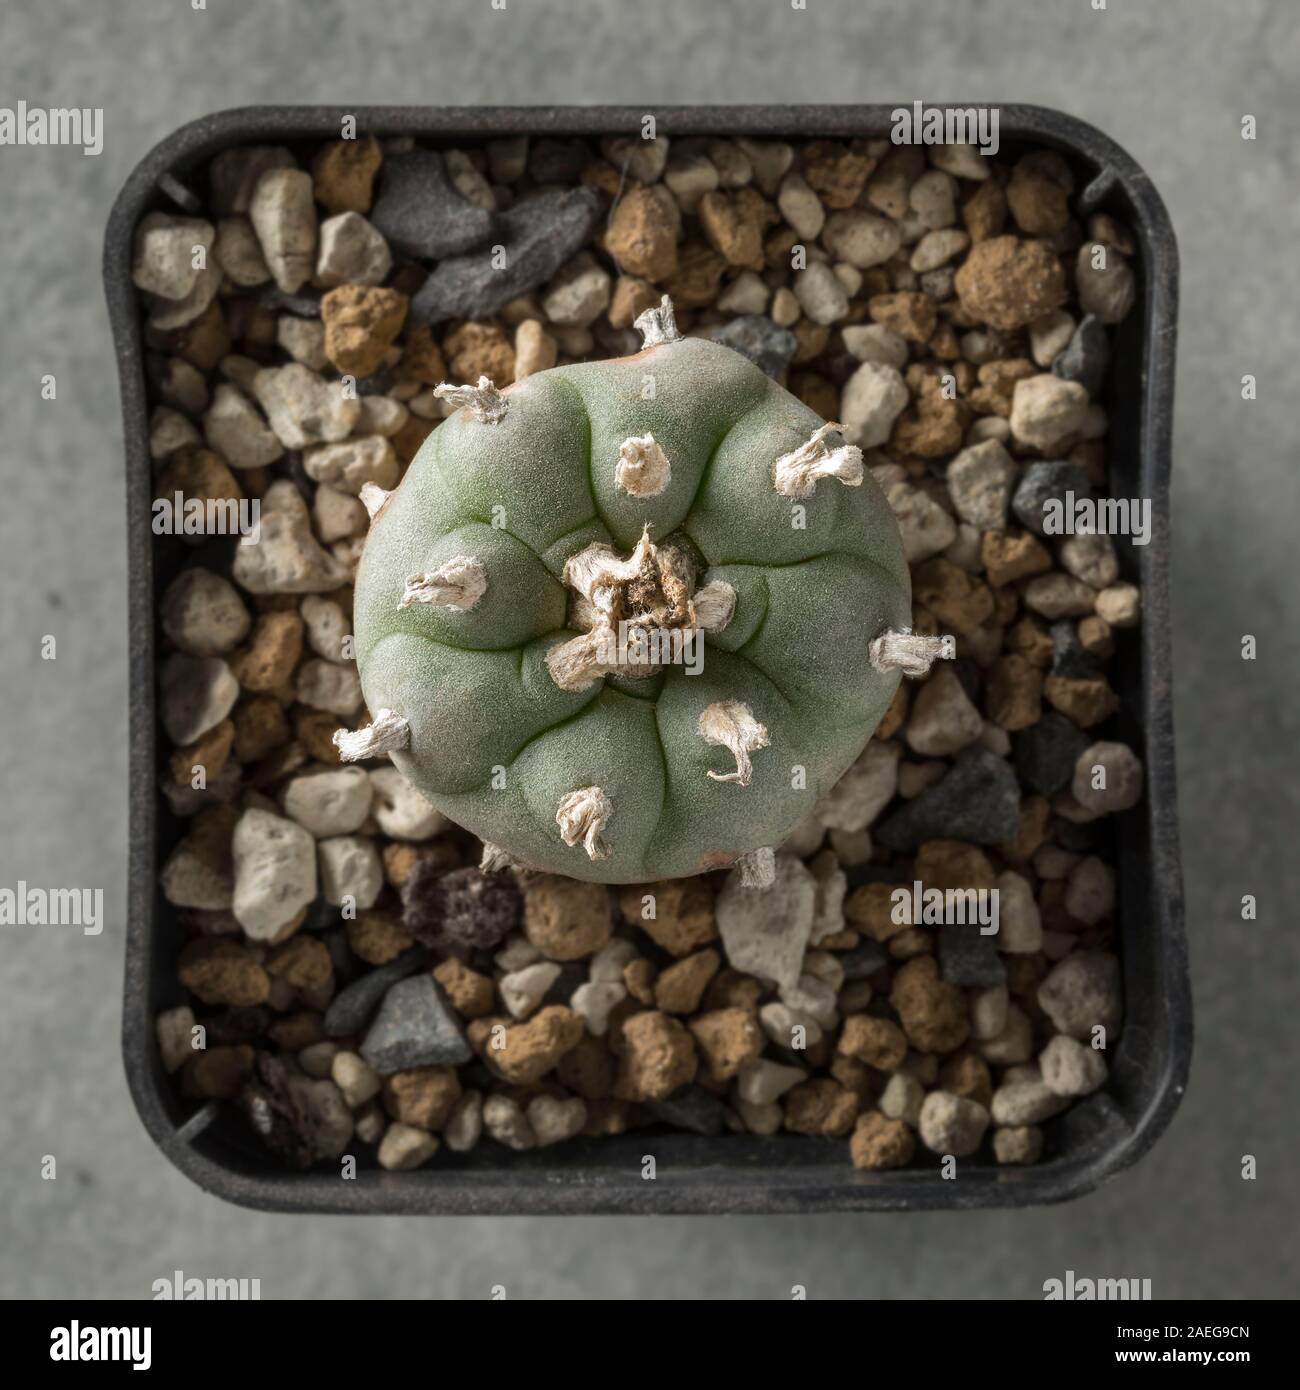 Peyote cactus Lophophora williamsii in a pot used as a hallucinogen by the Native Americans and recreational drug userseen from above Stock Photo